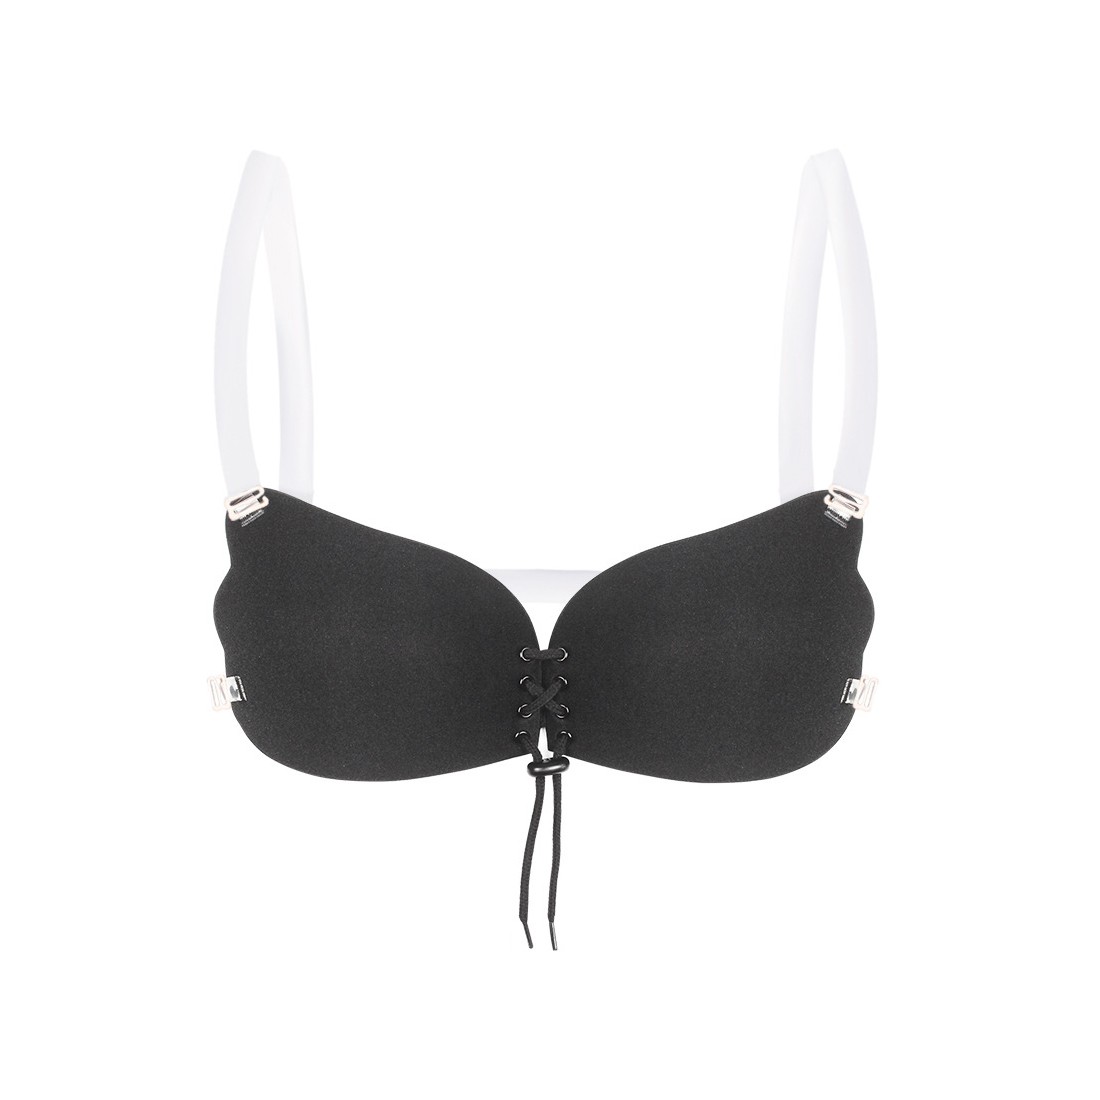 https://bodyshaper.co.uk/87-thickbox_default/tyra-invisible-strap-cleavage-control-adhesive-backless-bra.jpg